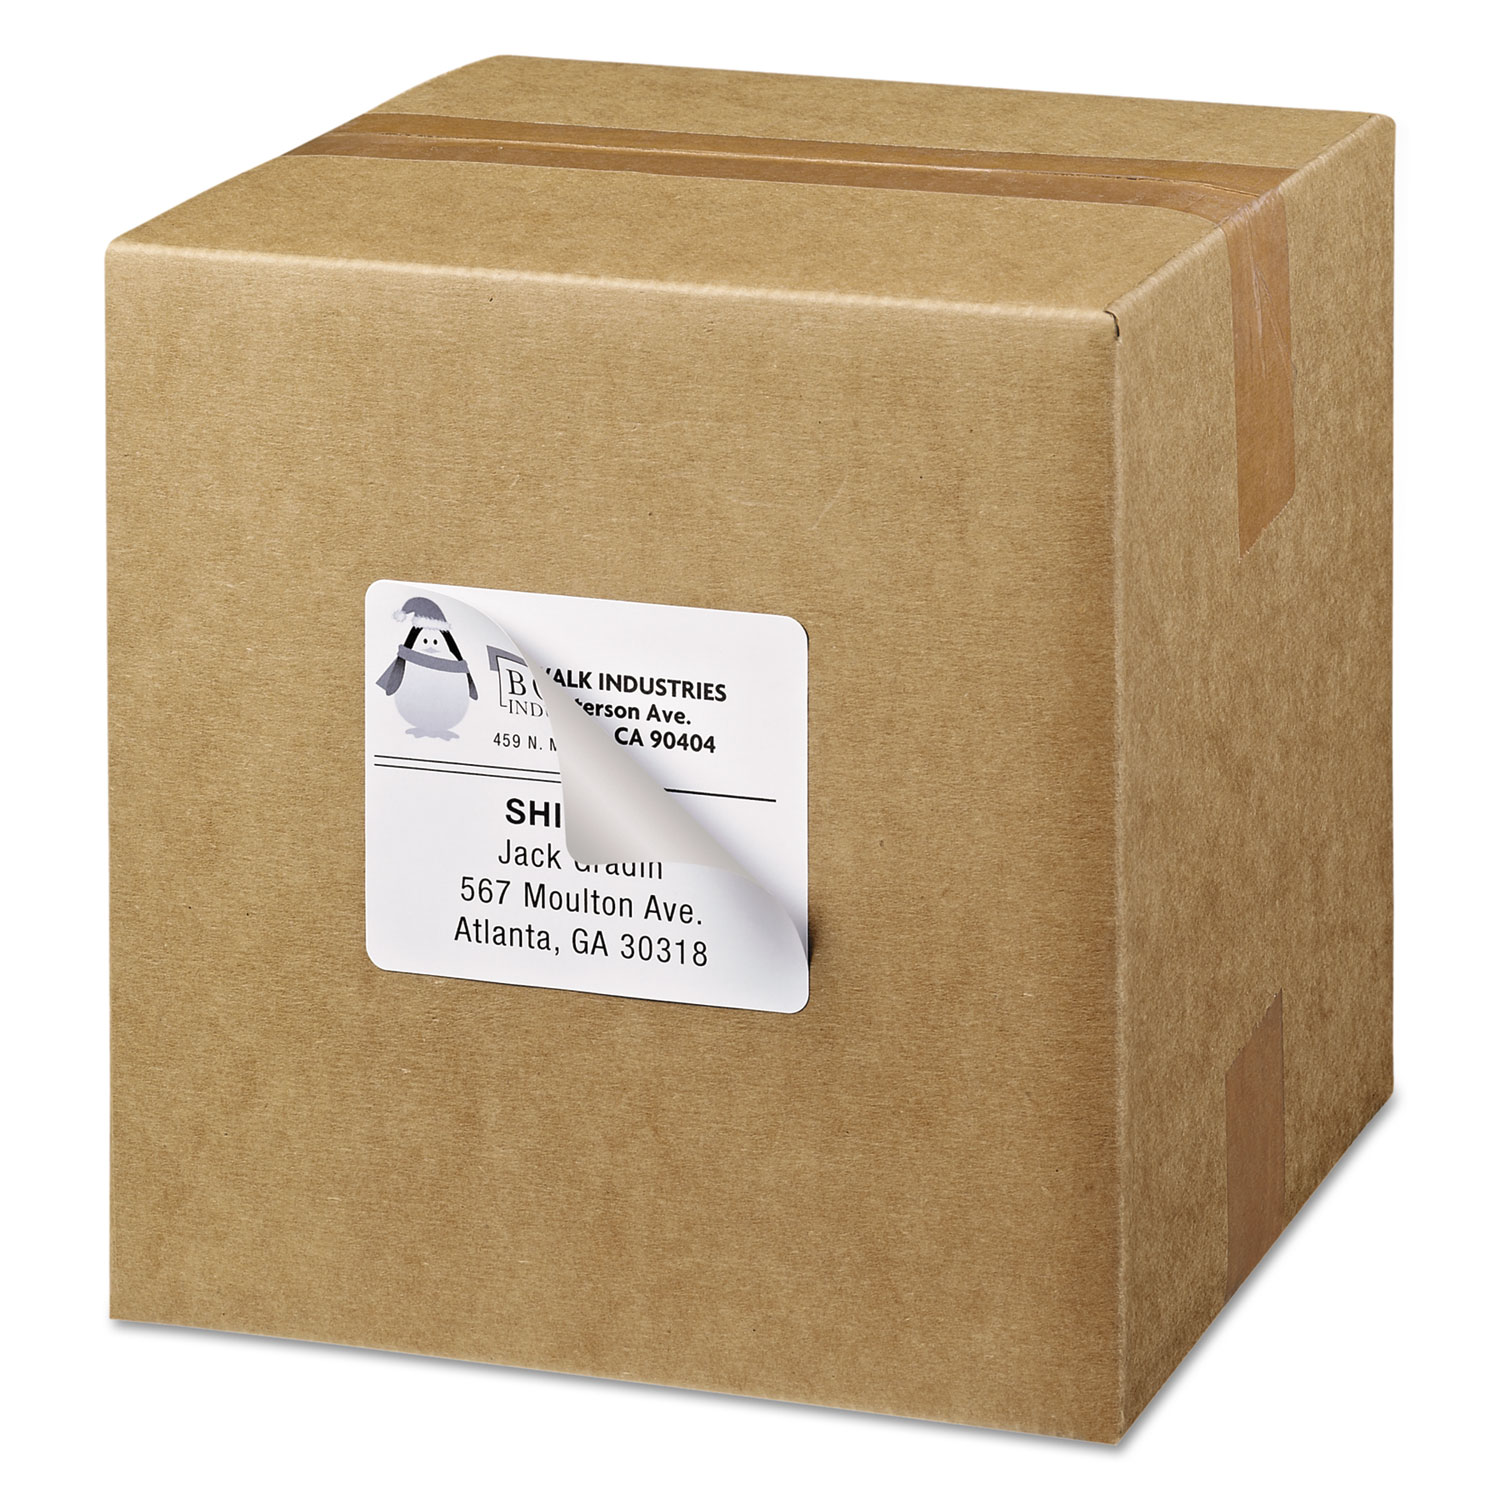 Shipping Labels with TrueBlock Technology, Laser, 3 1/3 x 4, White, 600/Box